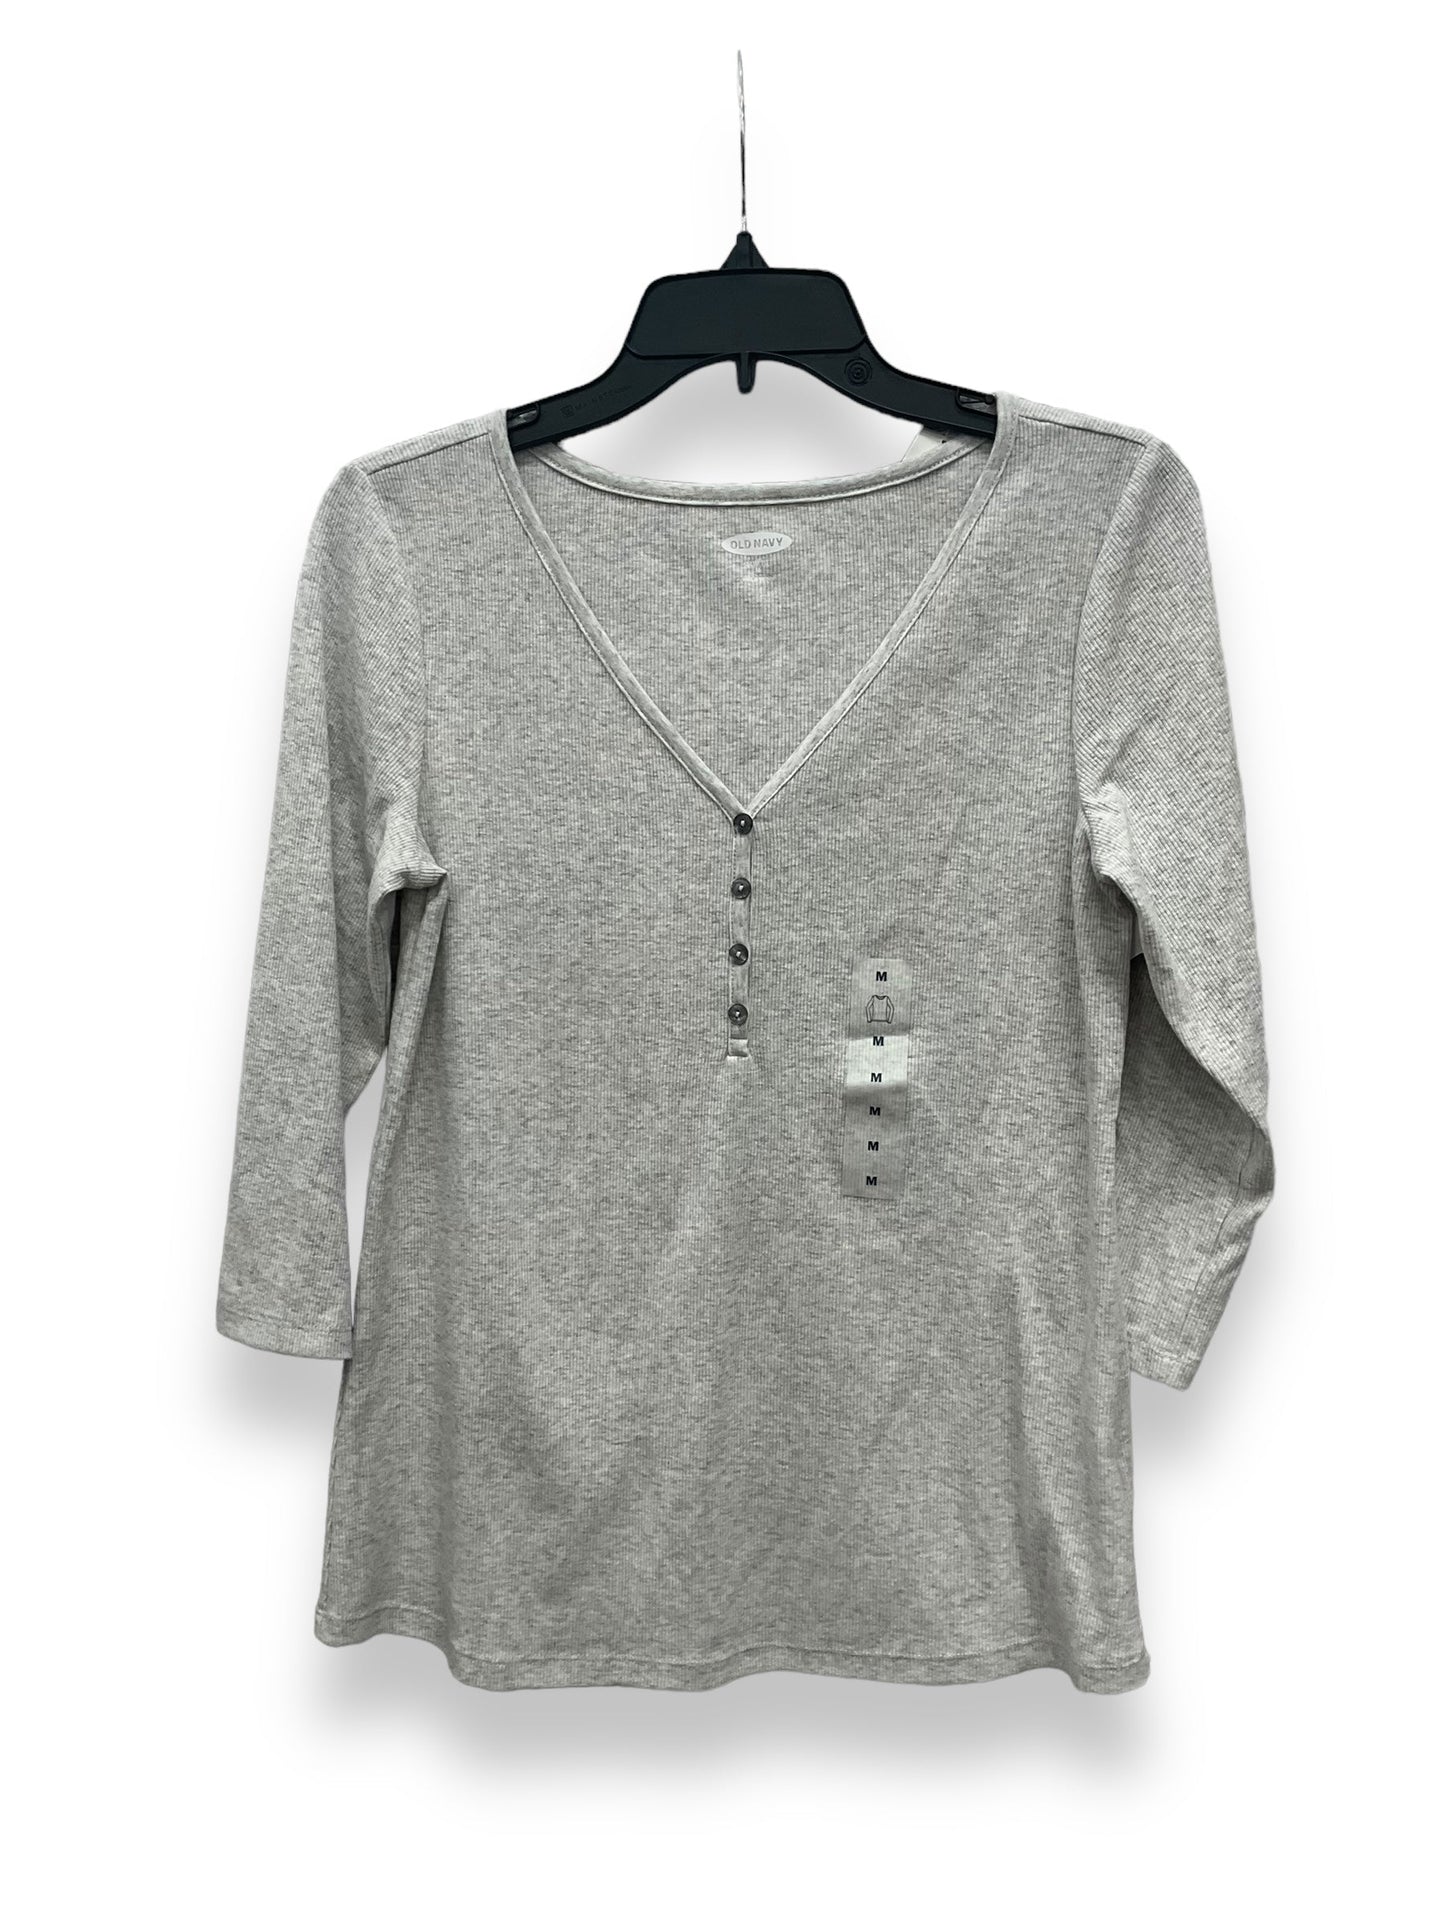 Grey Top Long Sleeve Old Navy, Size M